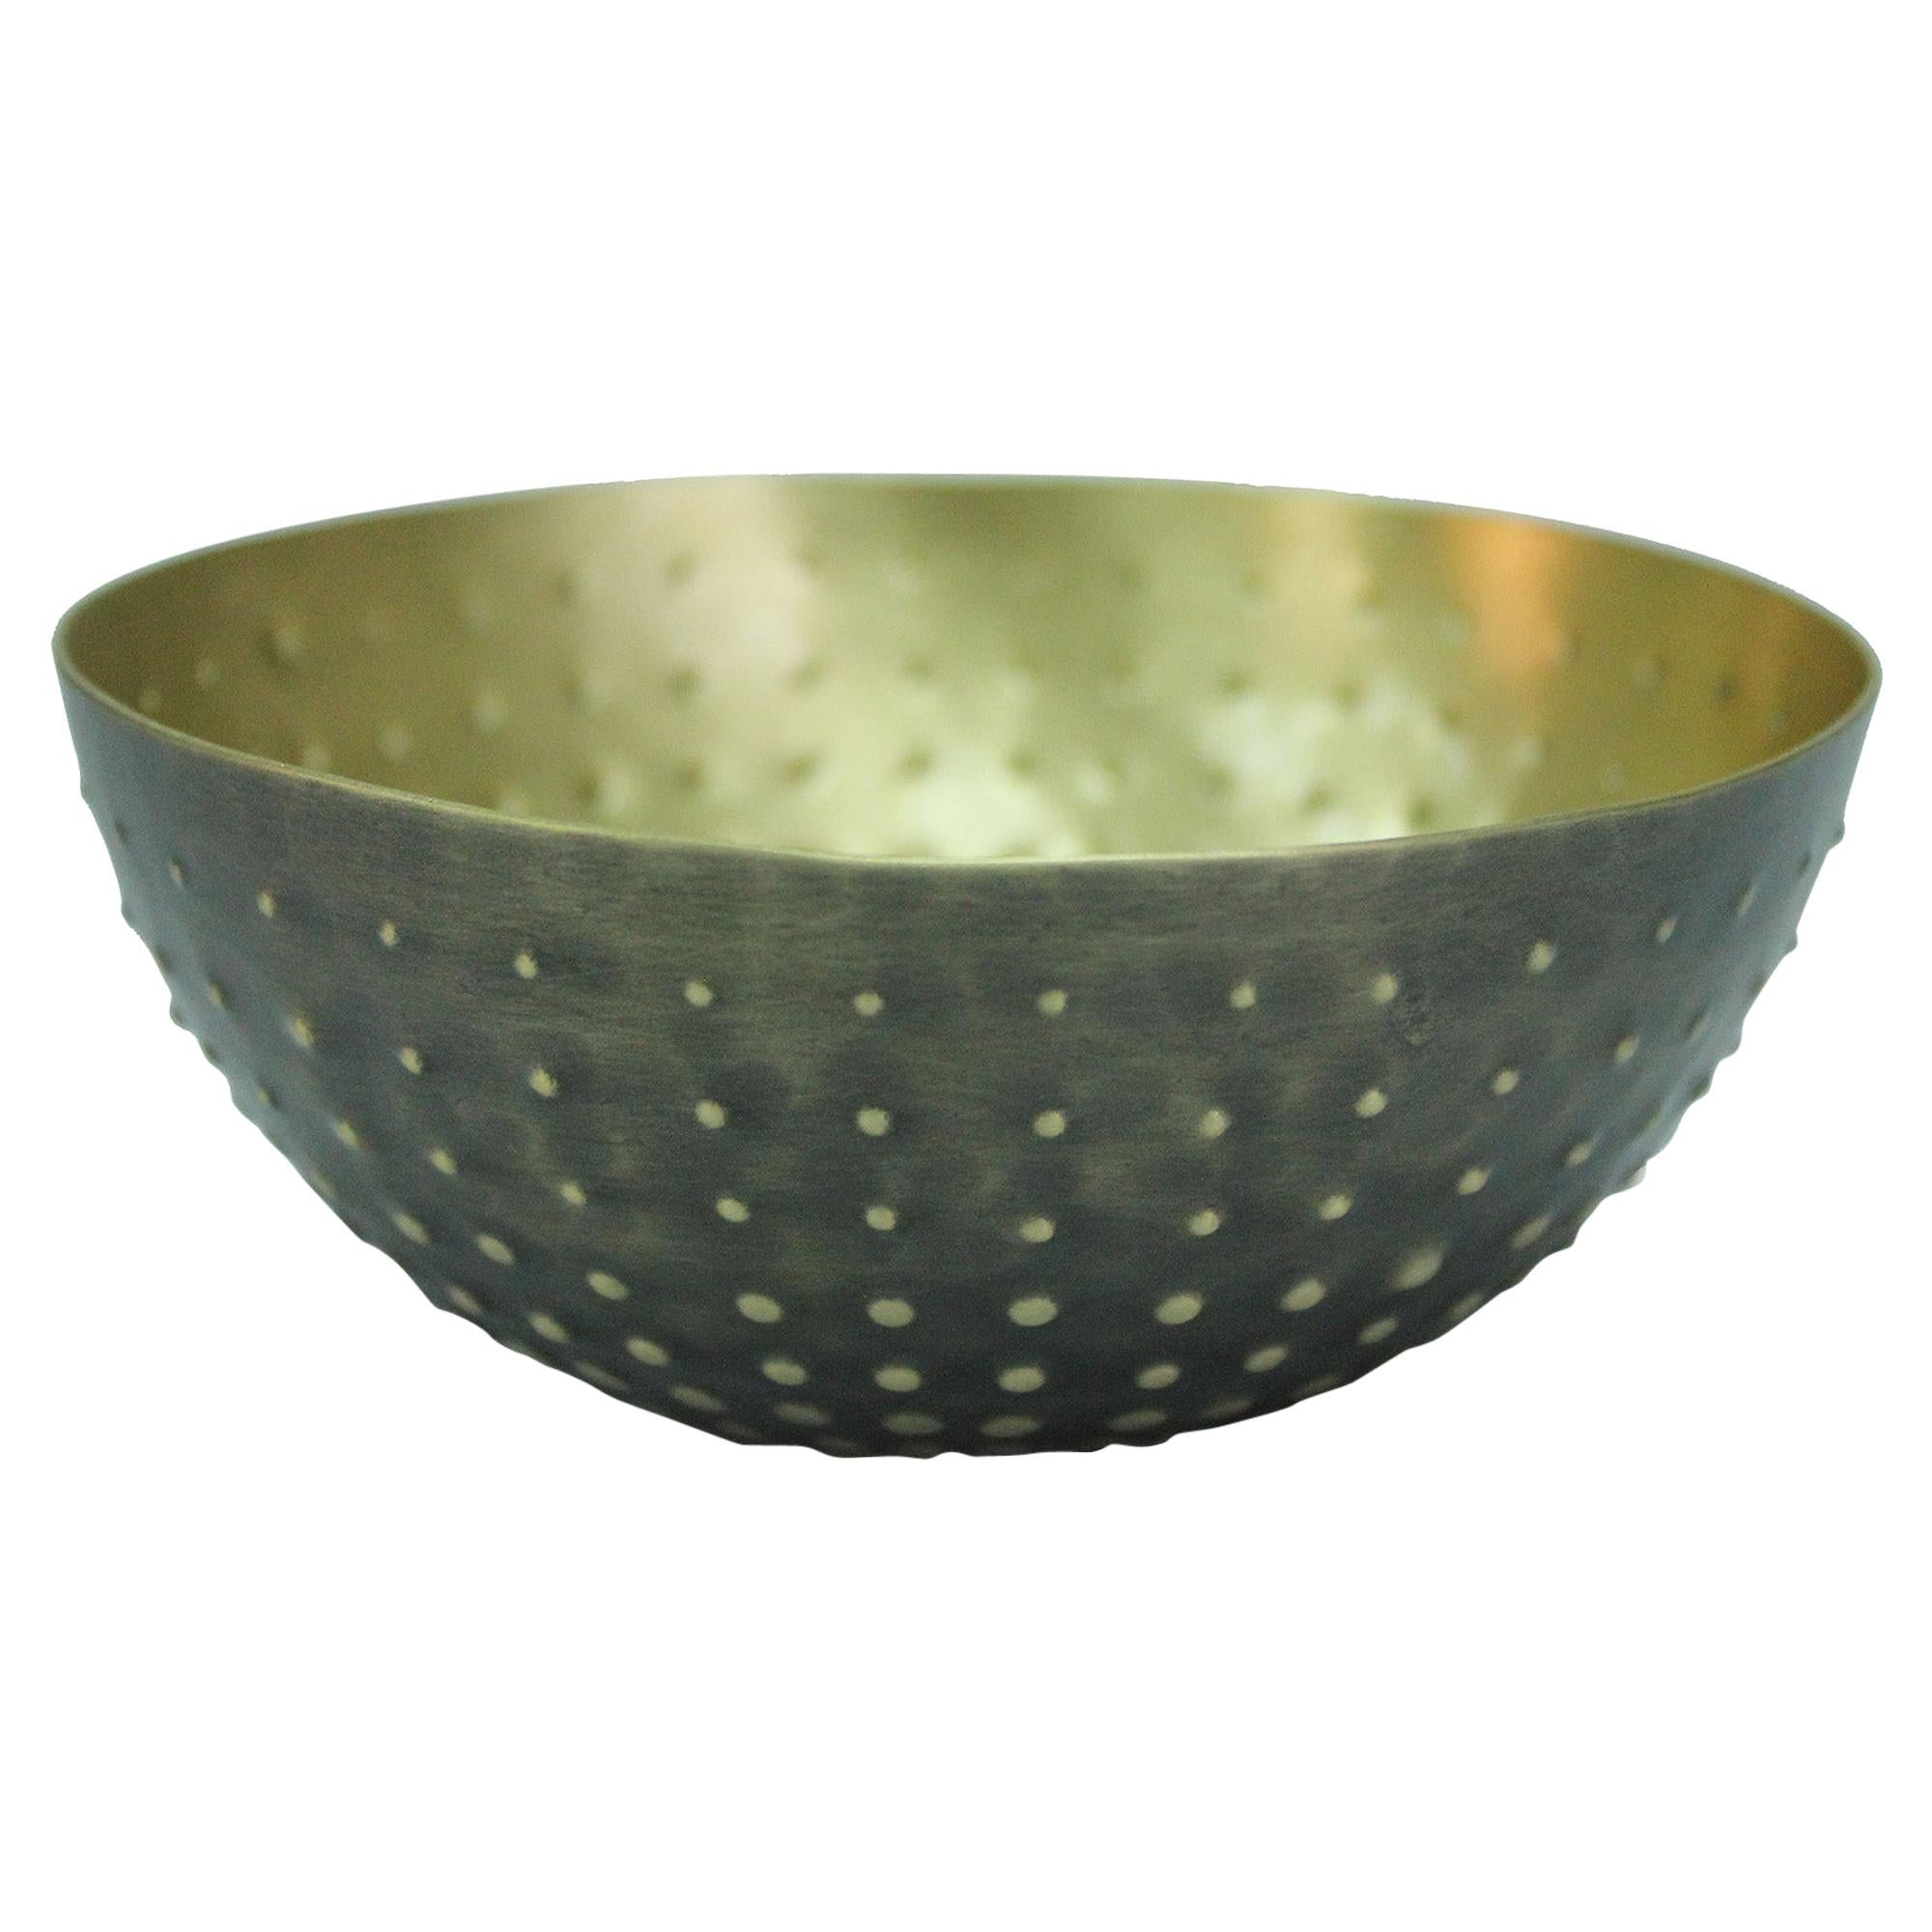 Vesi Bowl in Antique Brass by CuratedKravet